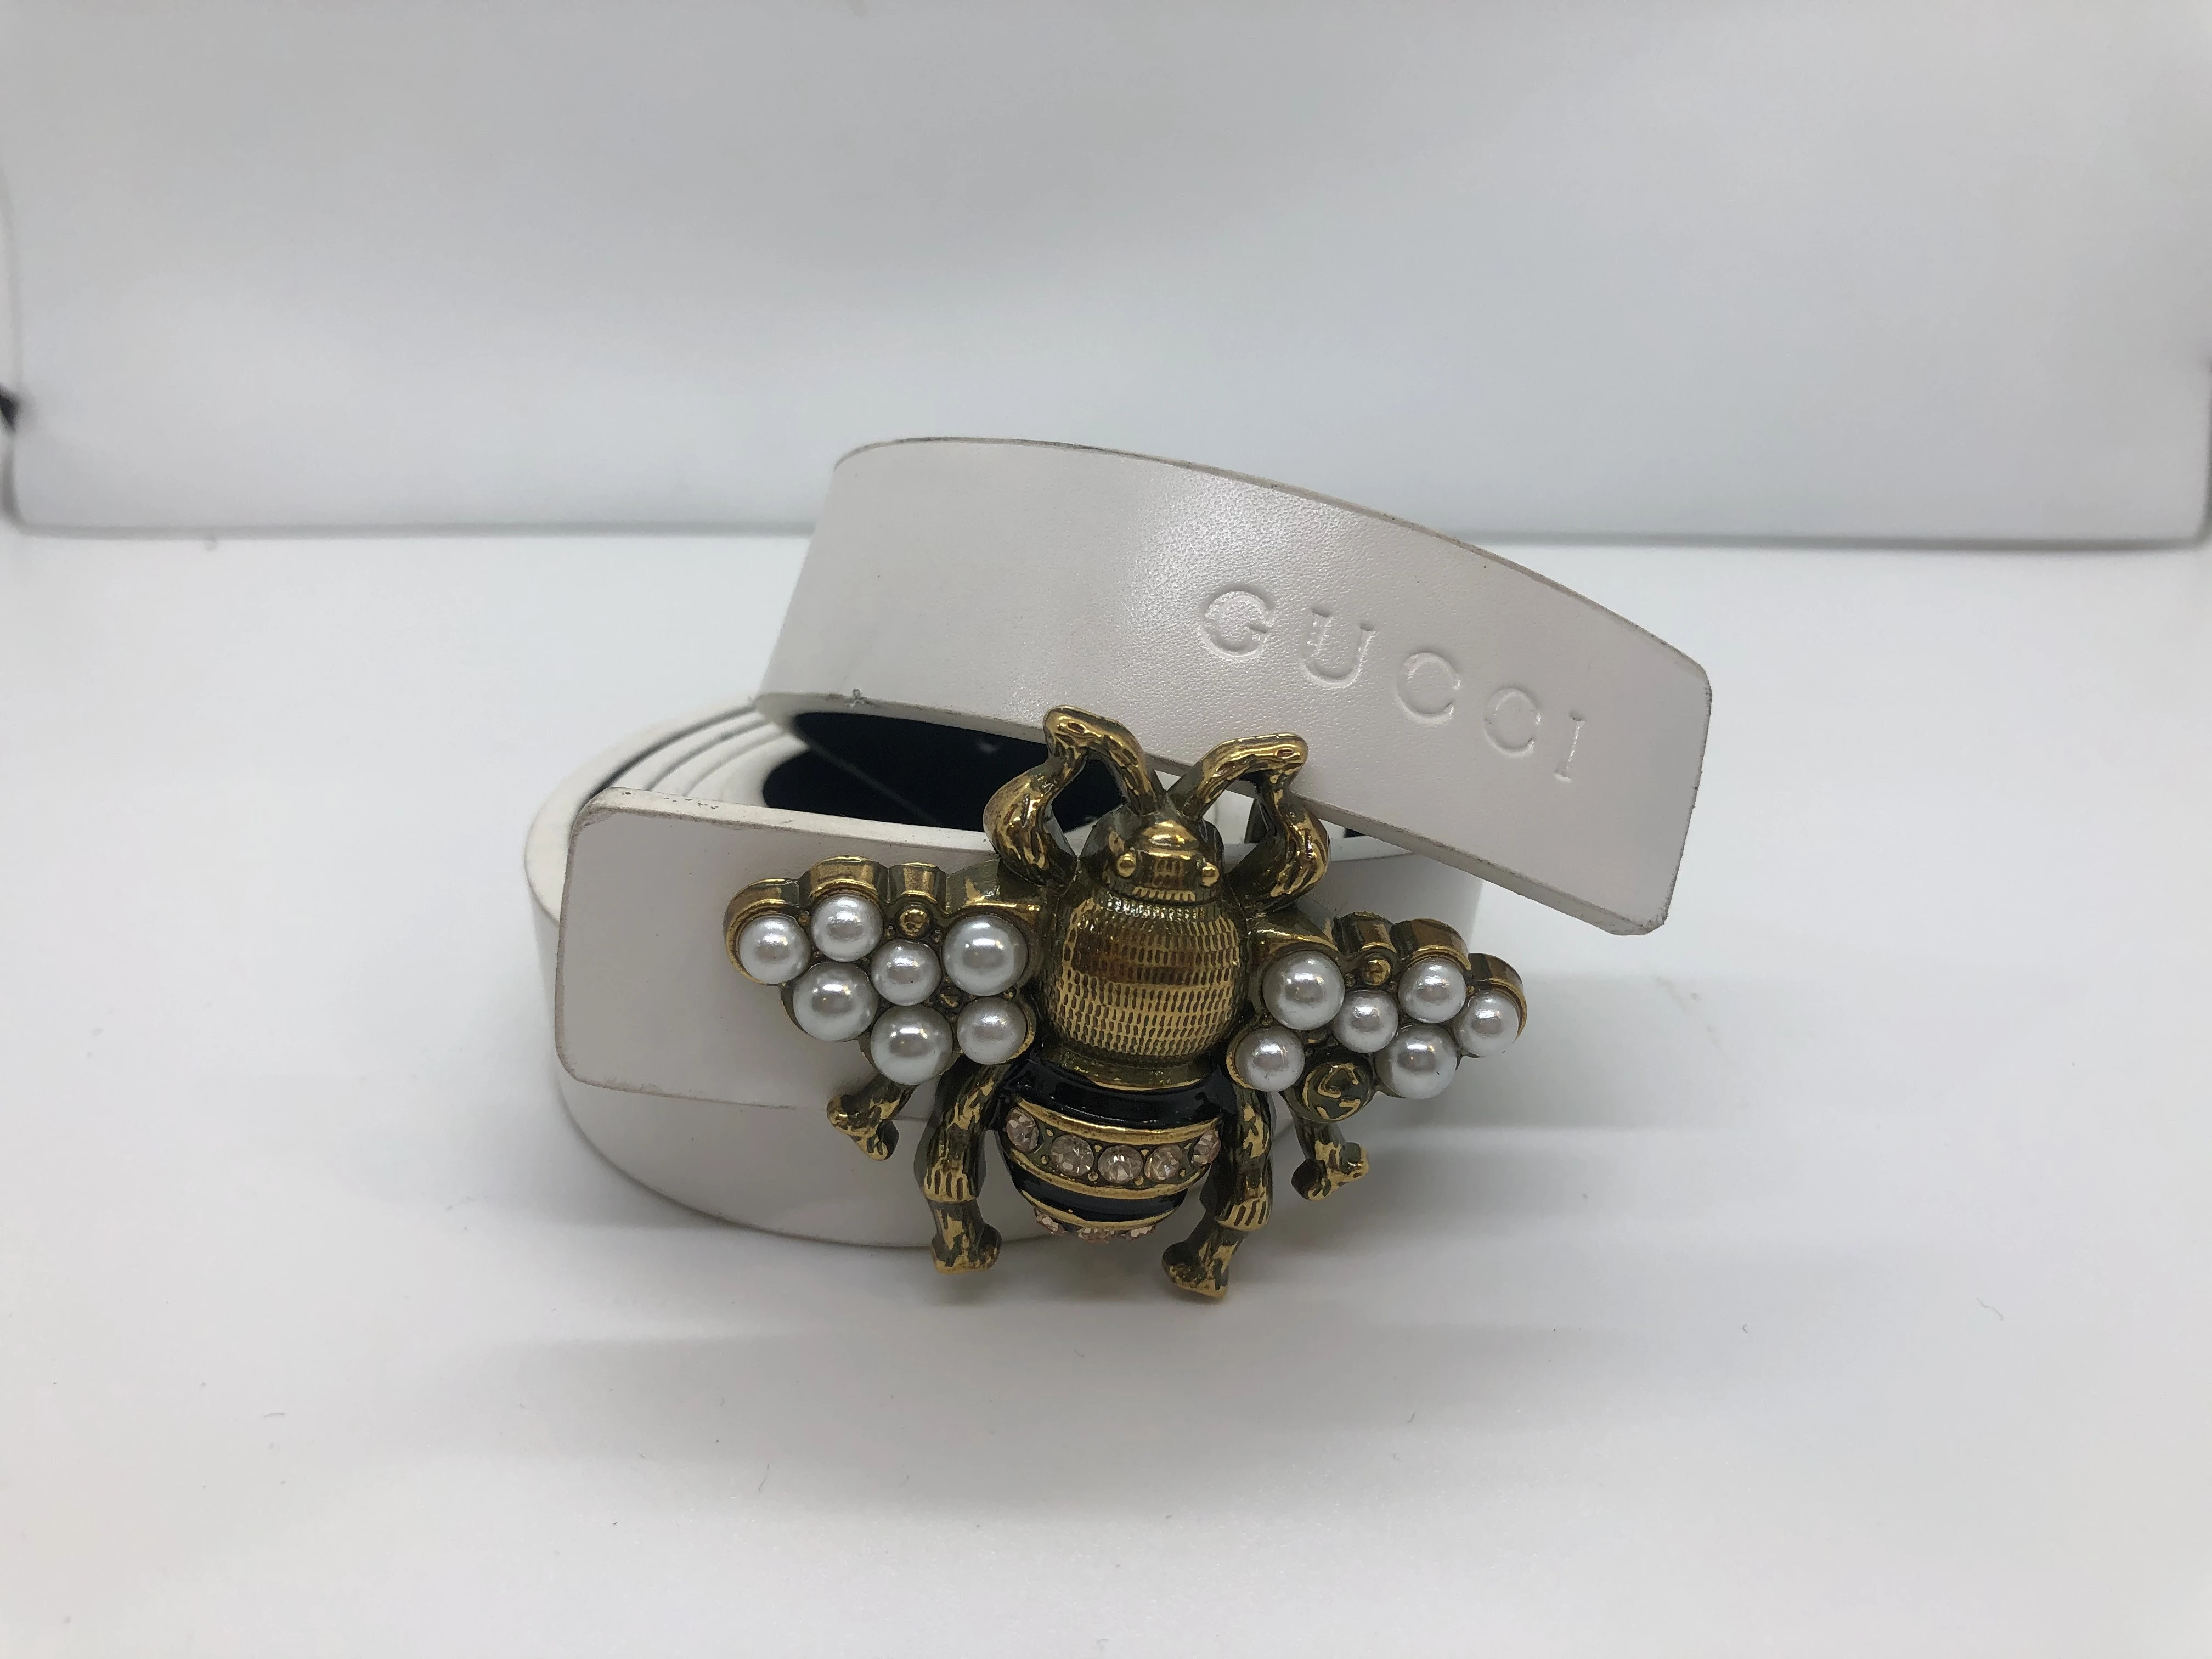 White Gucci women's belt, golden color butterfly buckle, with brand logo finishes